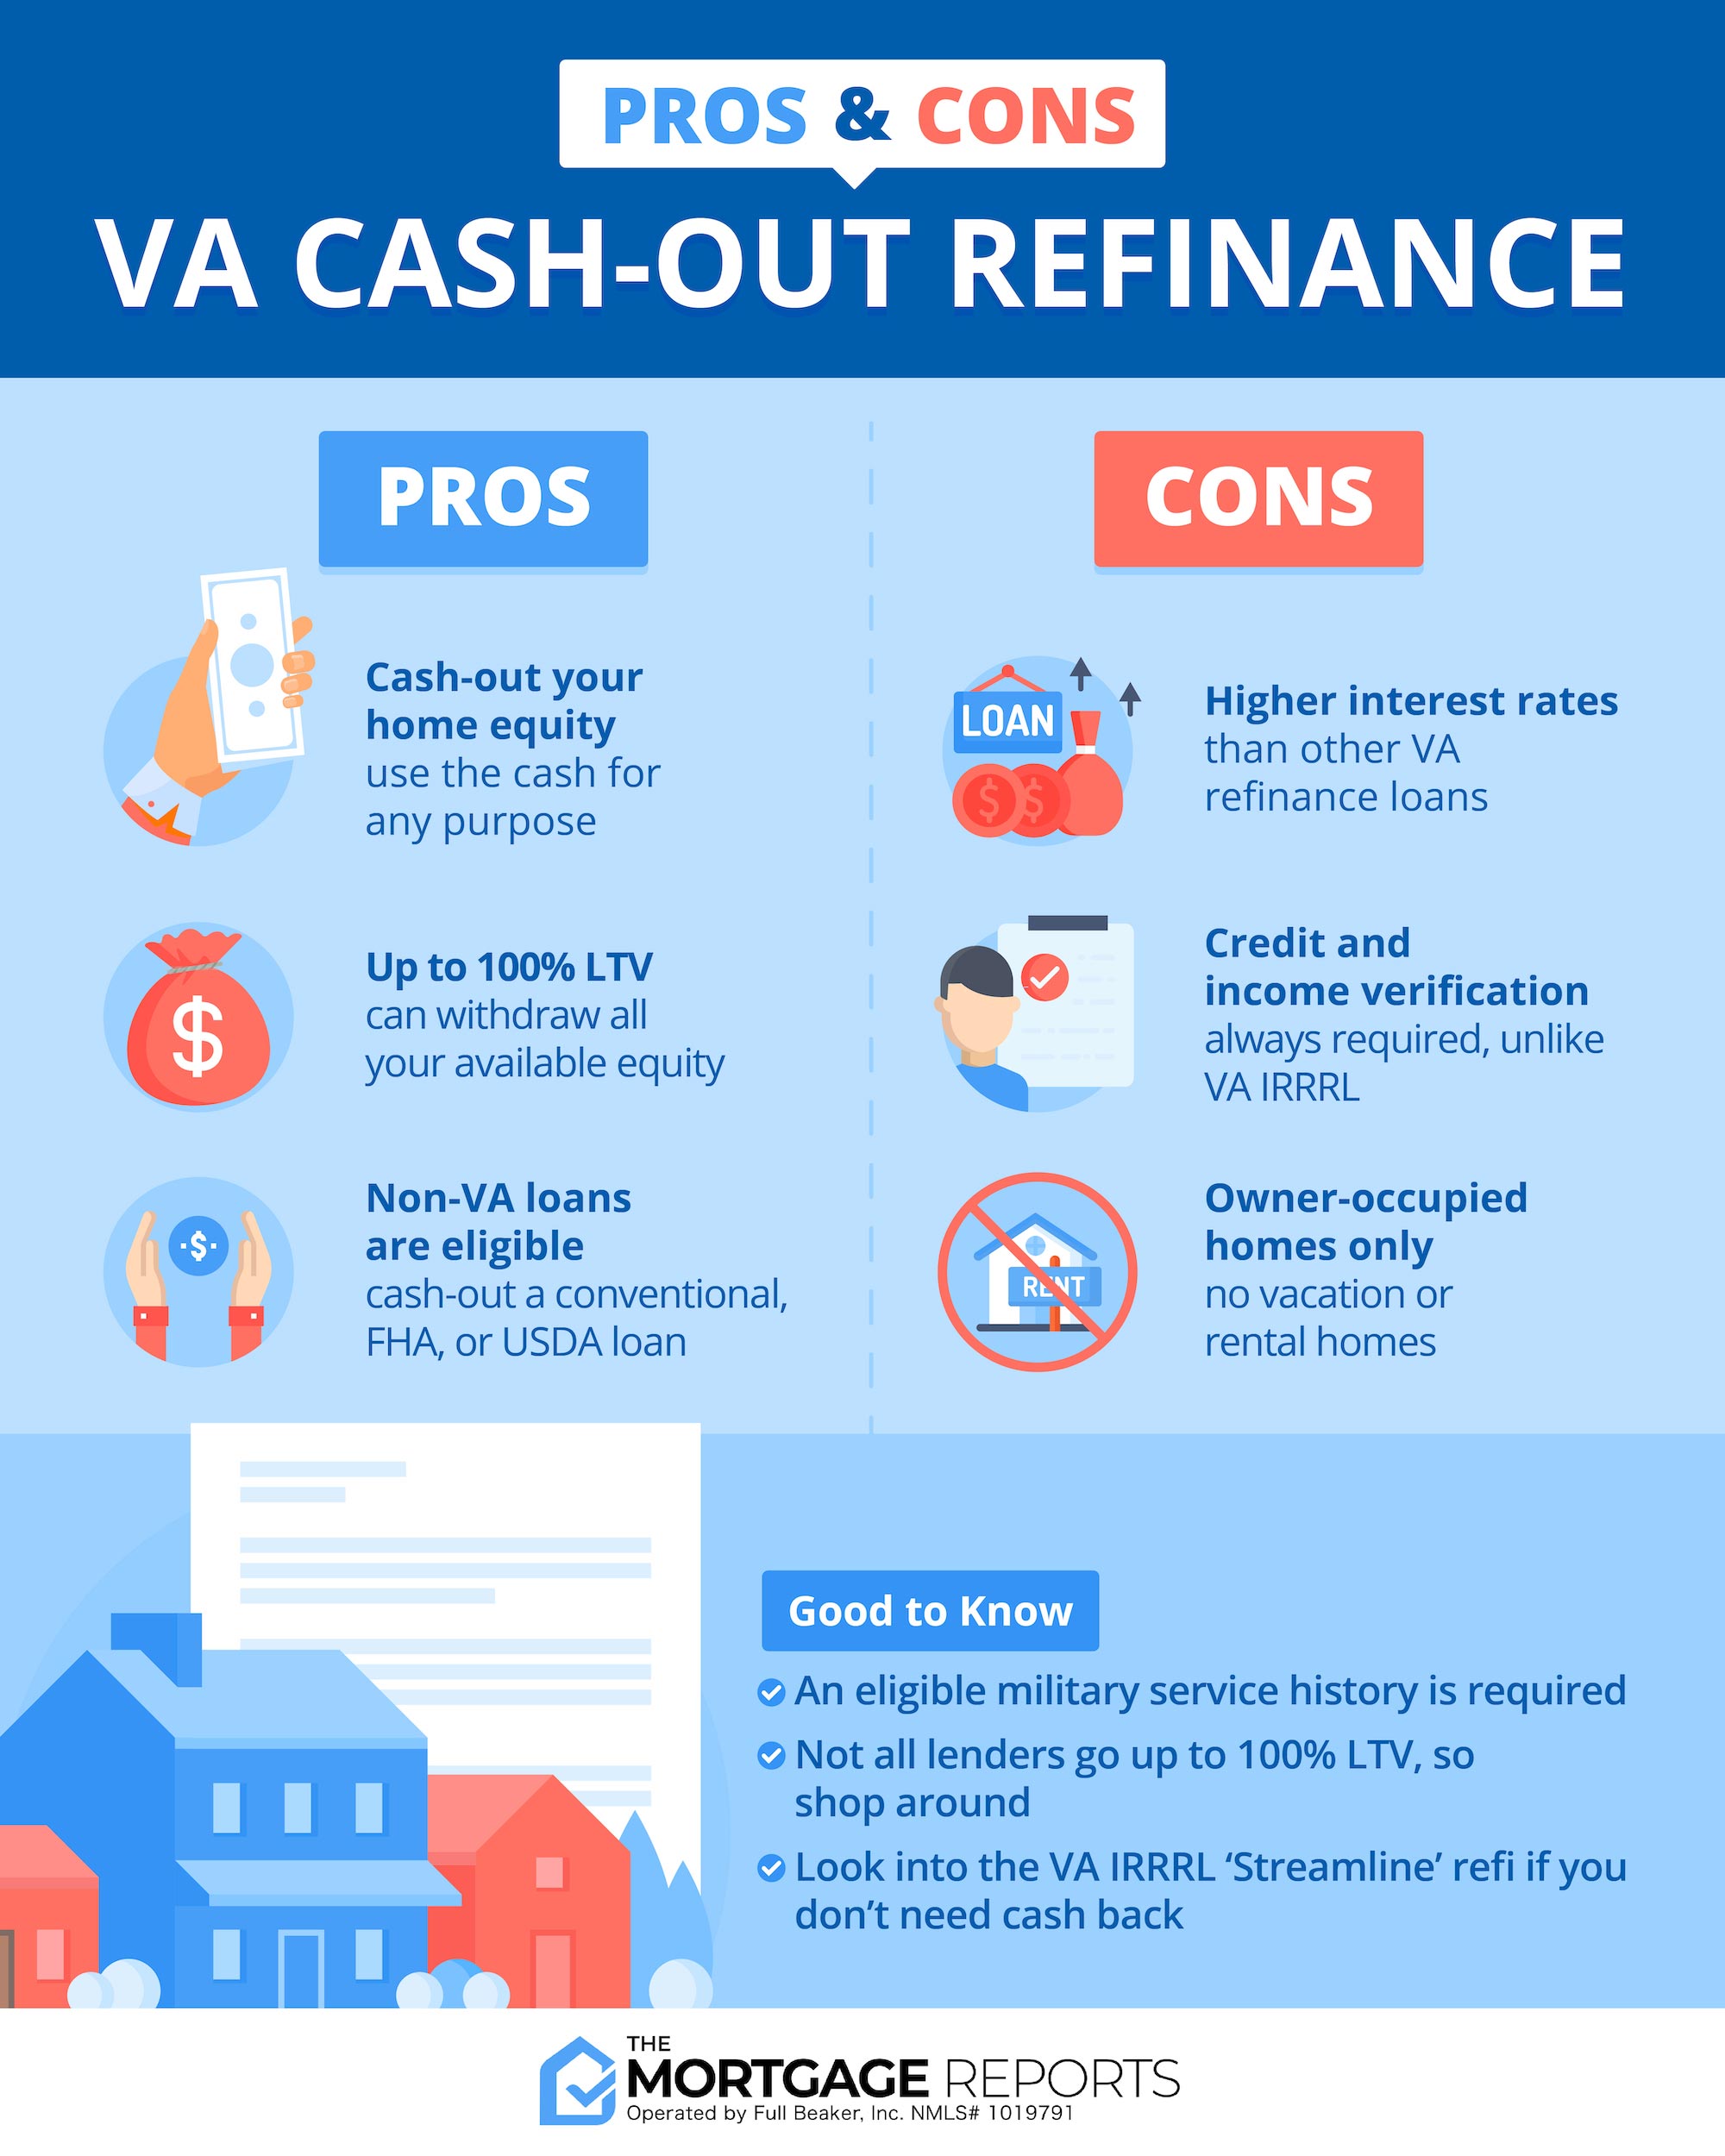 Infographic showing pros and cons of the VA Cash-Out Refinance. Pros include being able to cash out up to 100% of your home equity, and the ability to cash out non-VA loans. Cons include higher interest rates, mandatory credit and income verification, and restricted to owner-occupied homes.